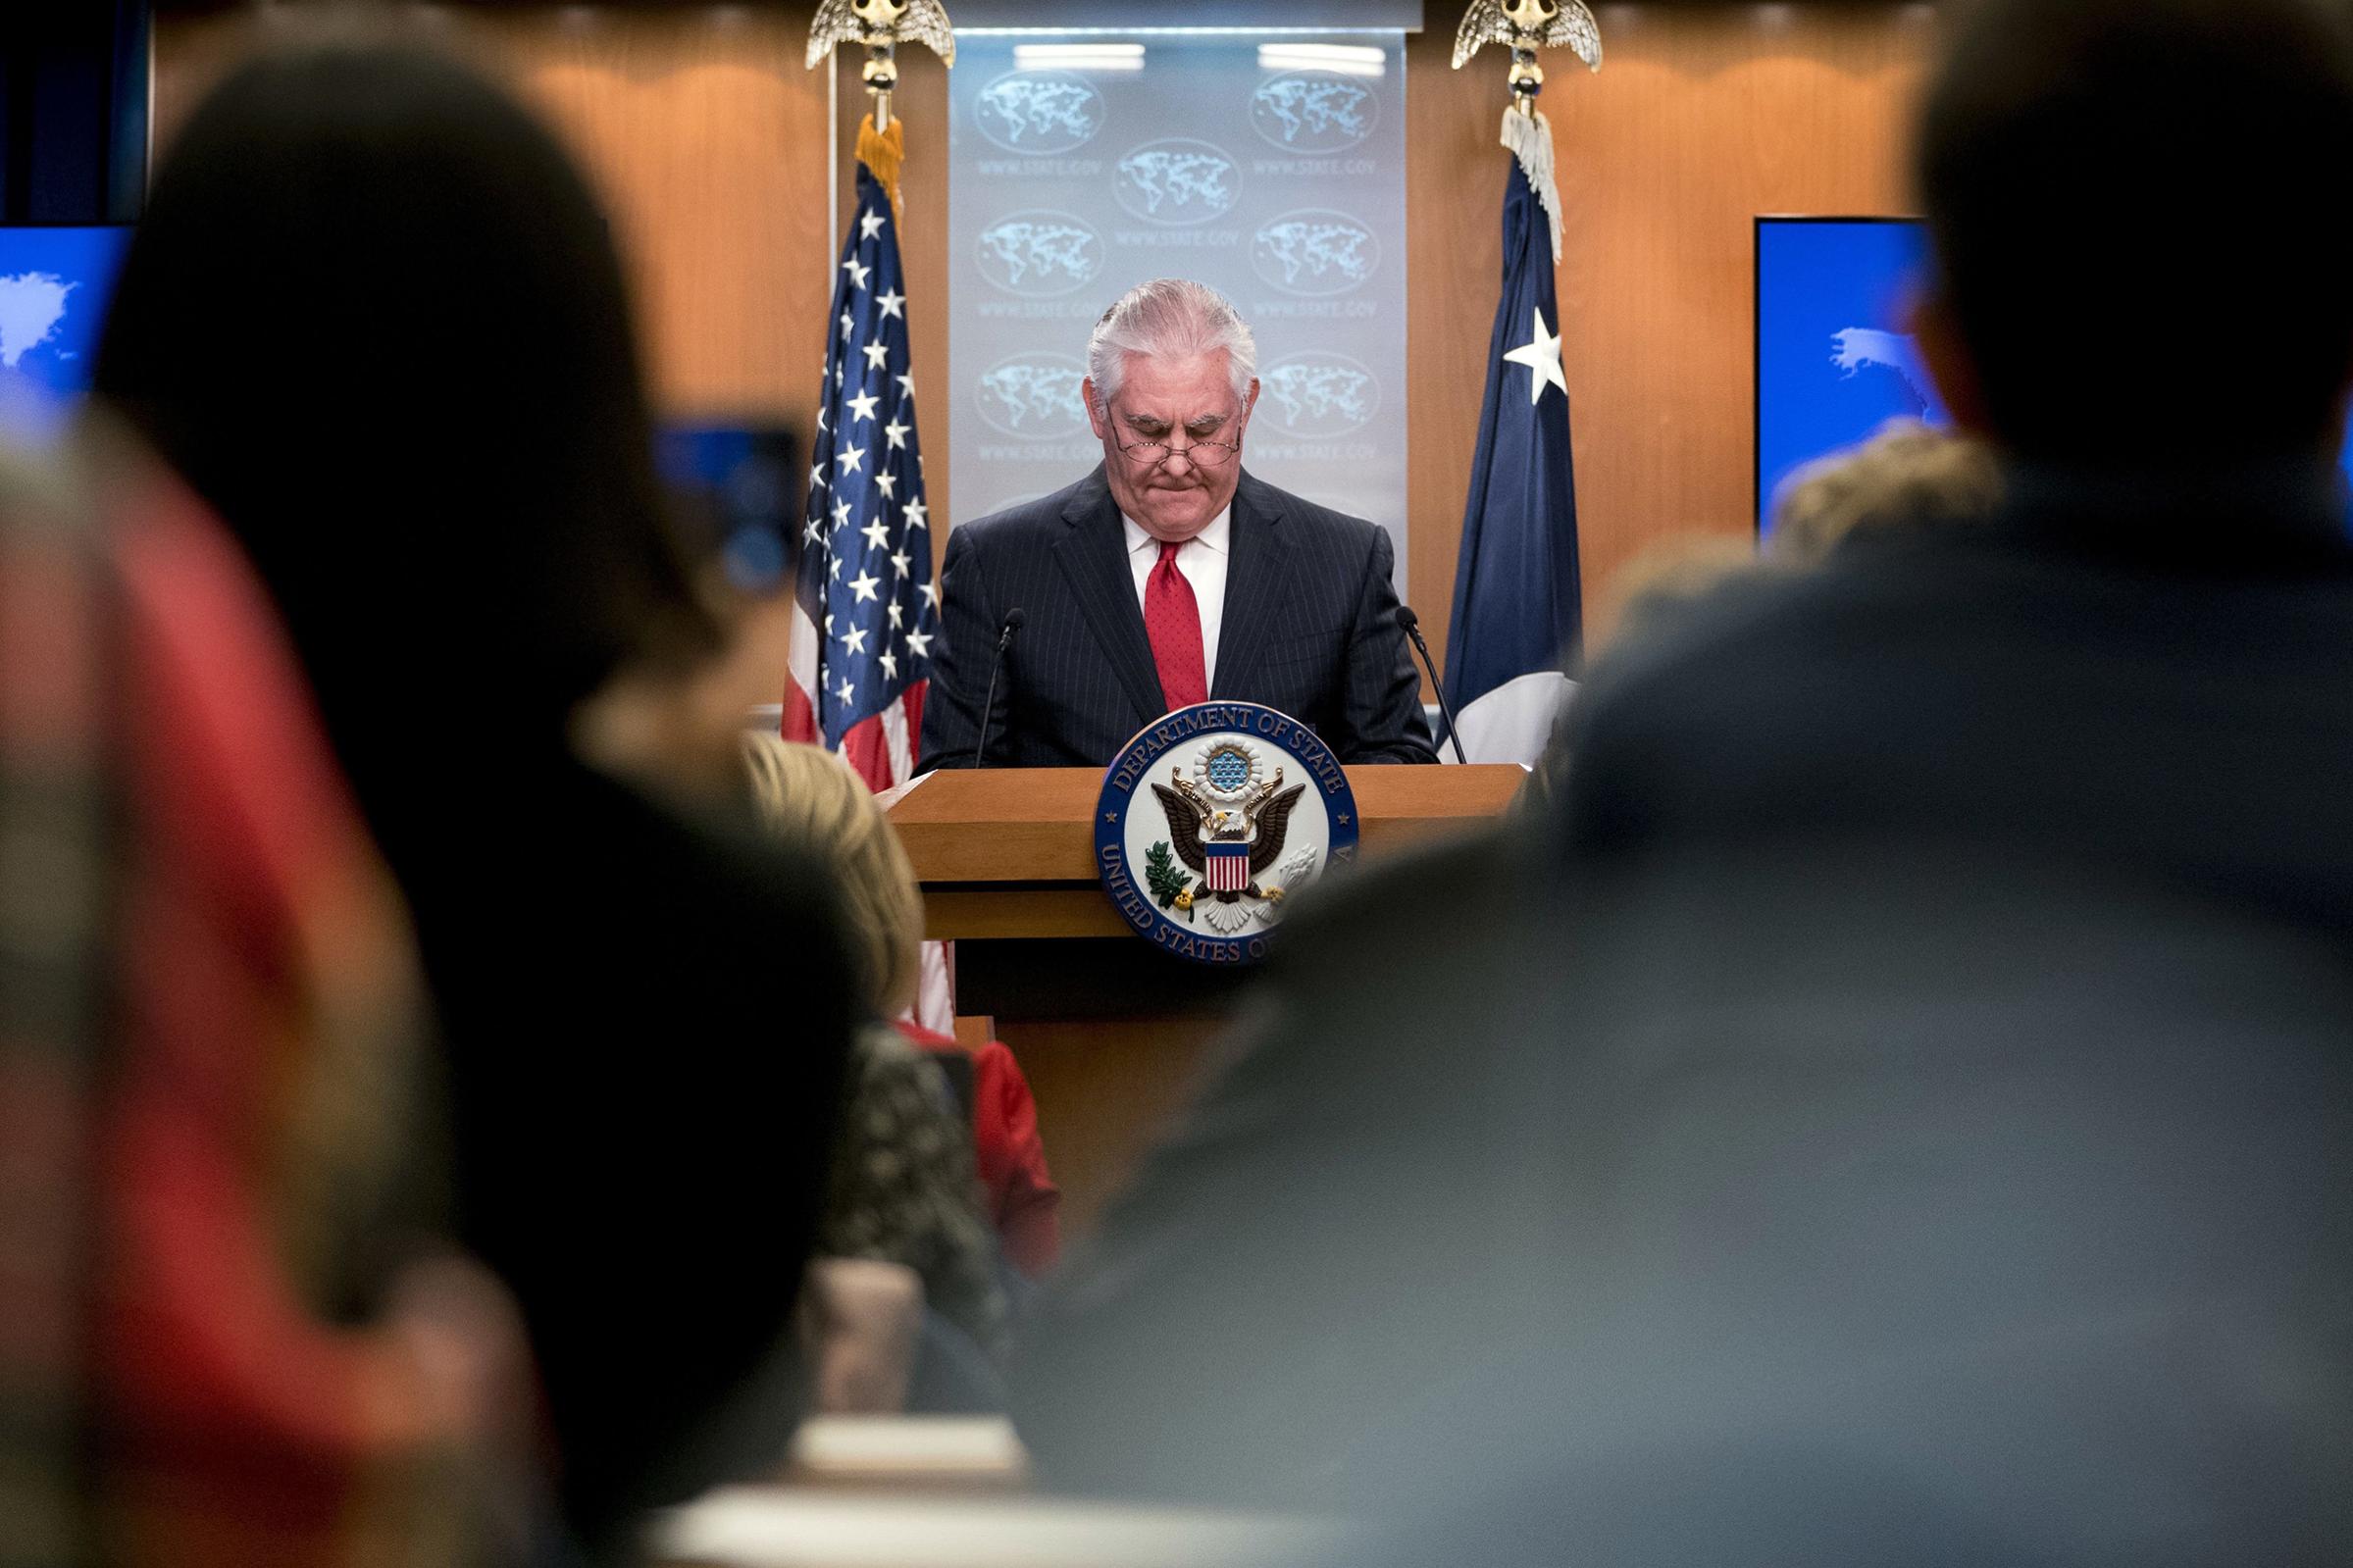 Secretary of State Rex Tillerson pauses while speaking at the State Department in Washington, on March 13, 2018.